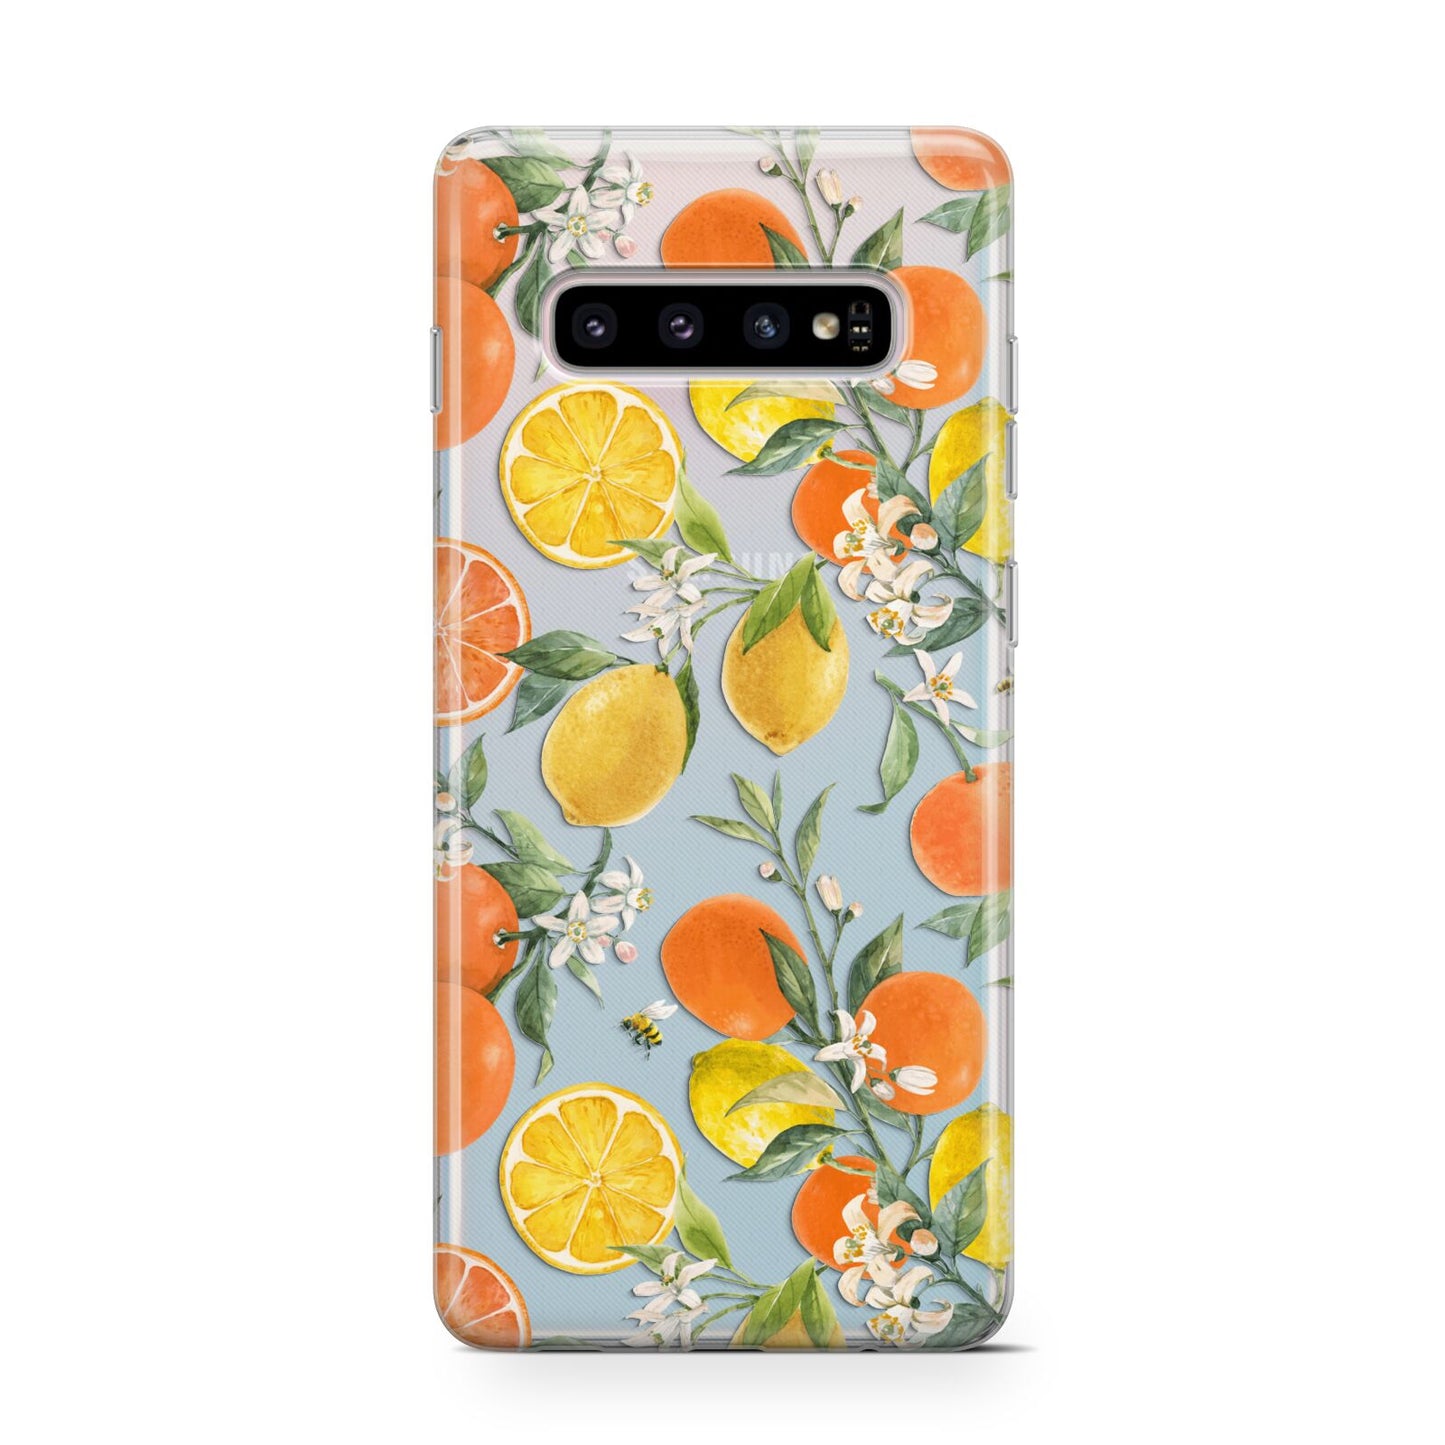 Lemons and Oranges Samsung Galaxy S10 Case